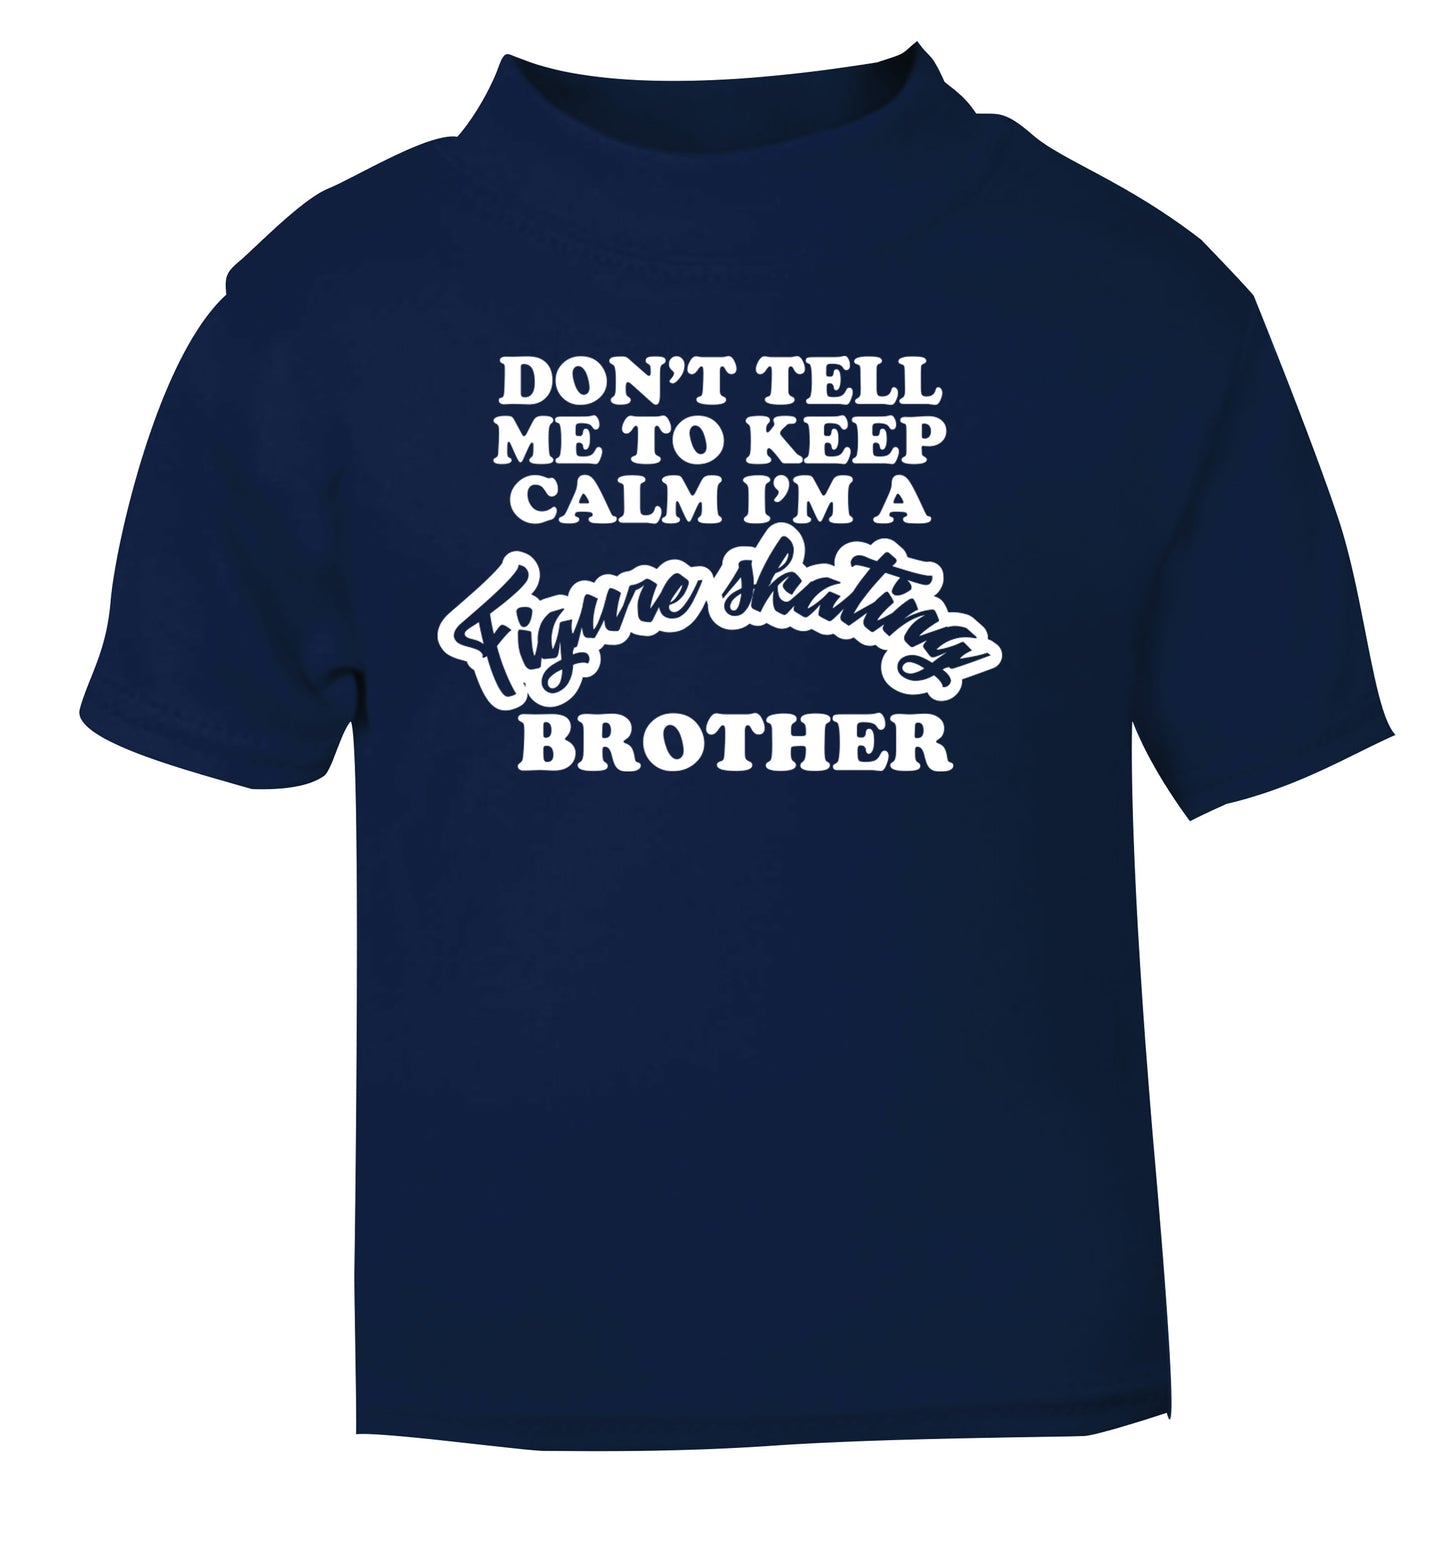 Don't tell me to keep calm I'm a figure skating brother navy Baby Toddler Tshirt 2 Years